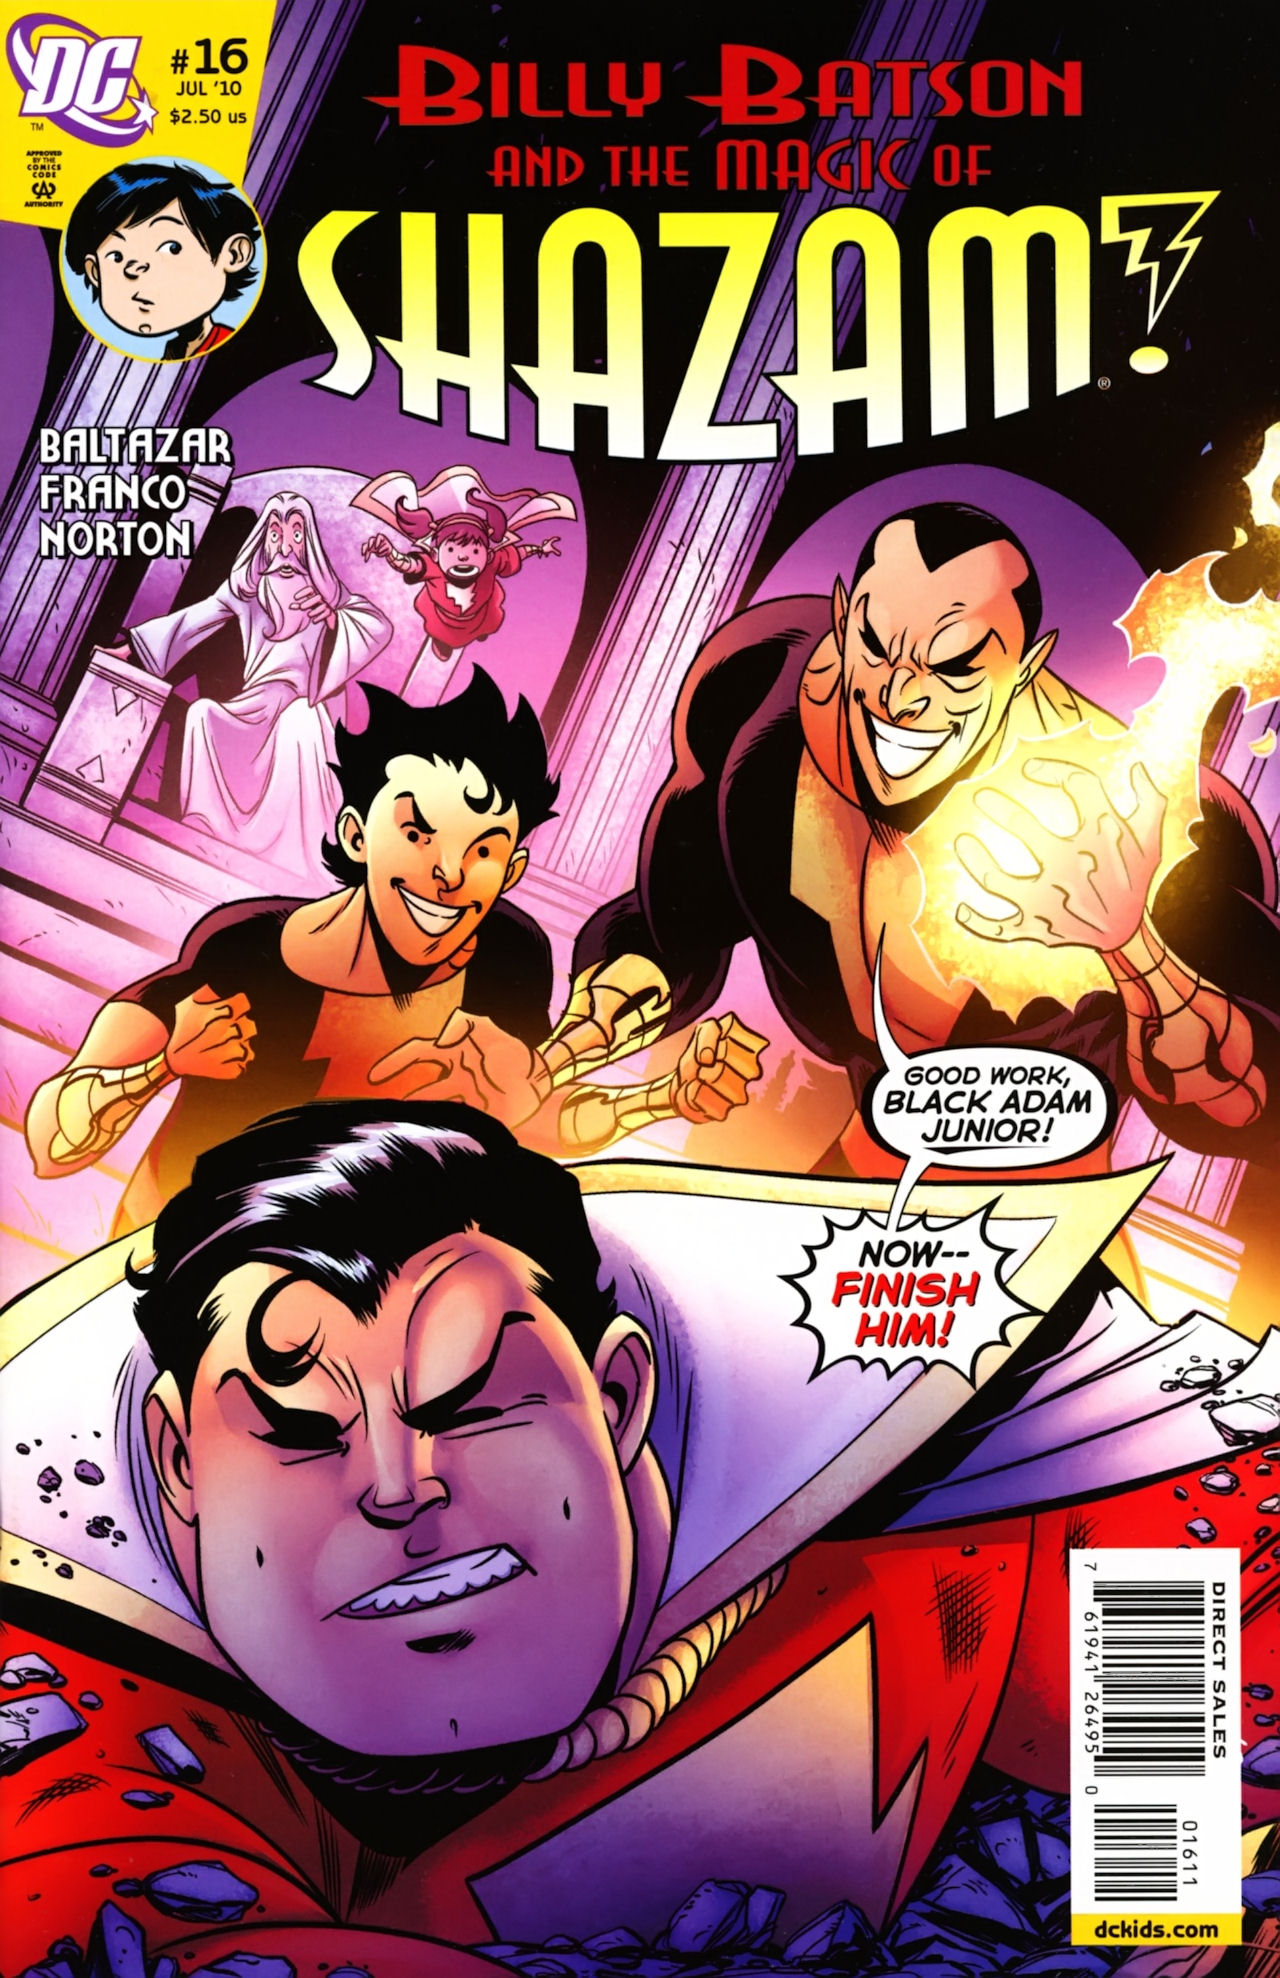 Billy Batson & The Magic of Shazam! issue 16 - Page 1